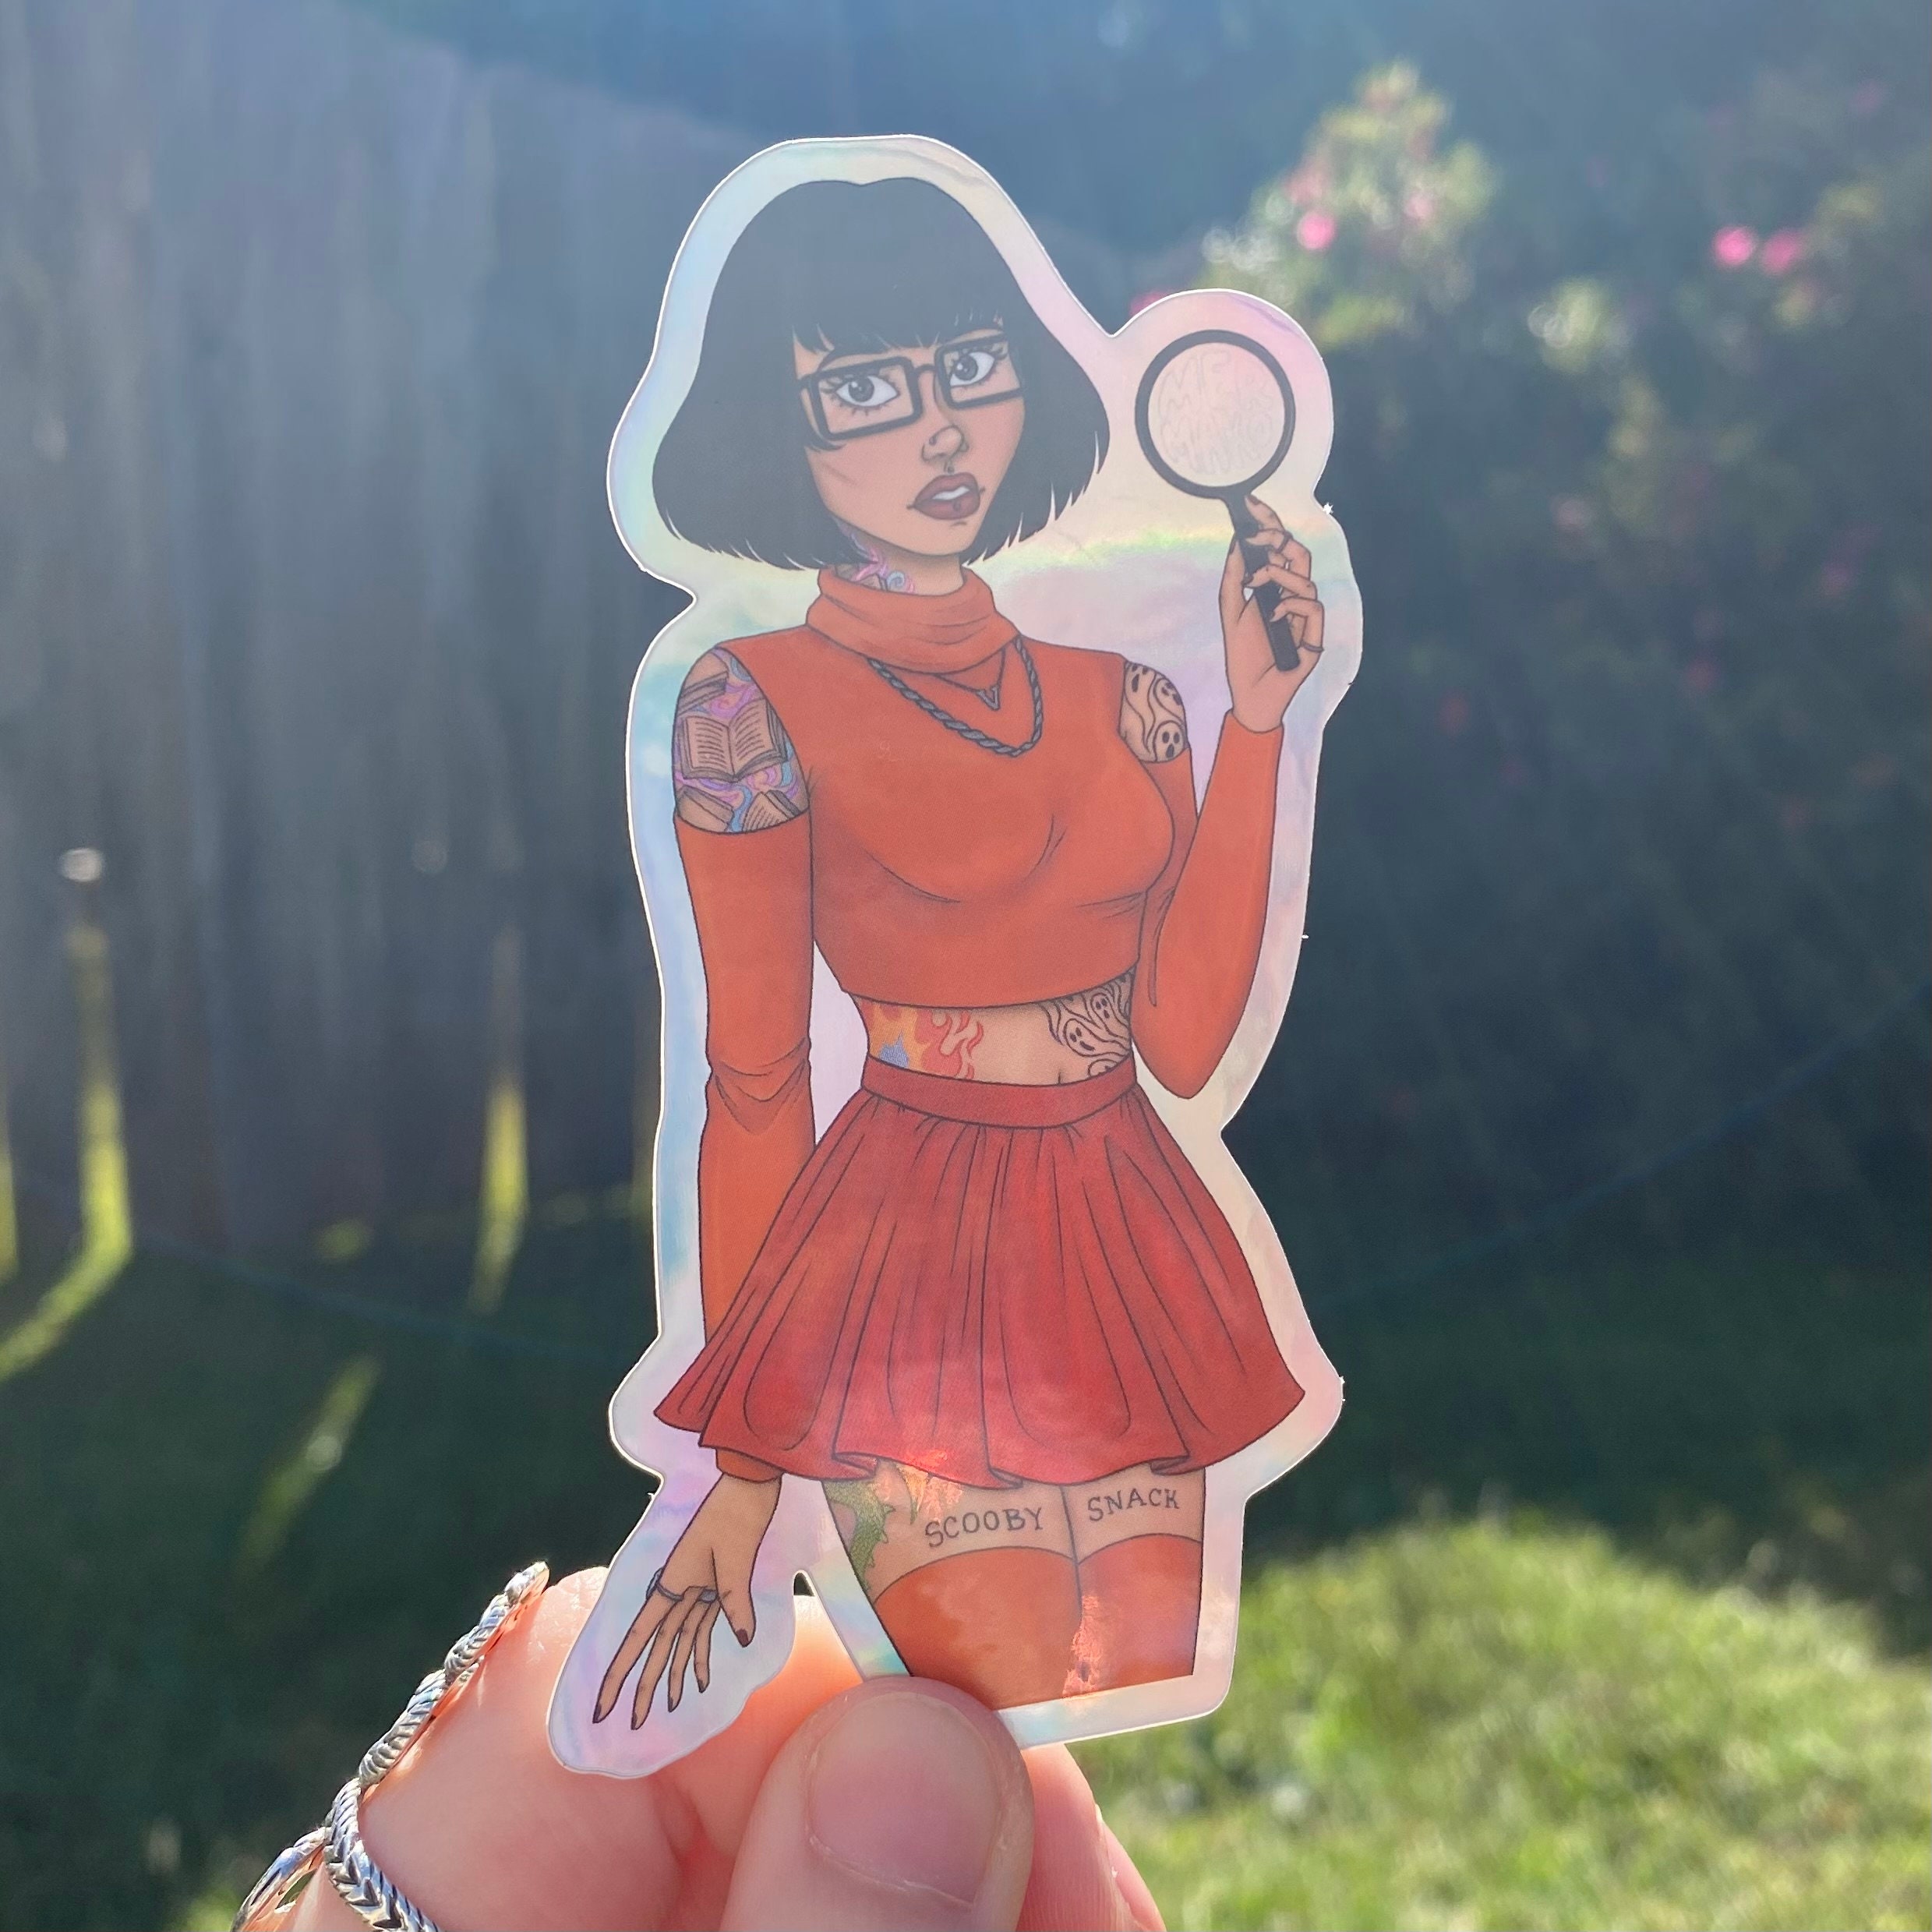 Scooby-Doo cosplayer raises the heat with a spot-on Velma makeover